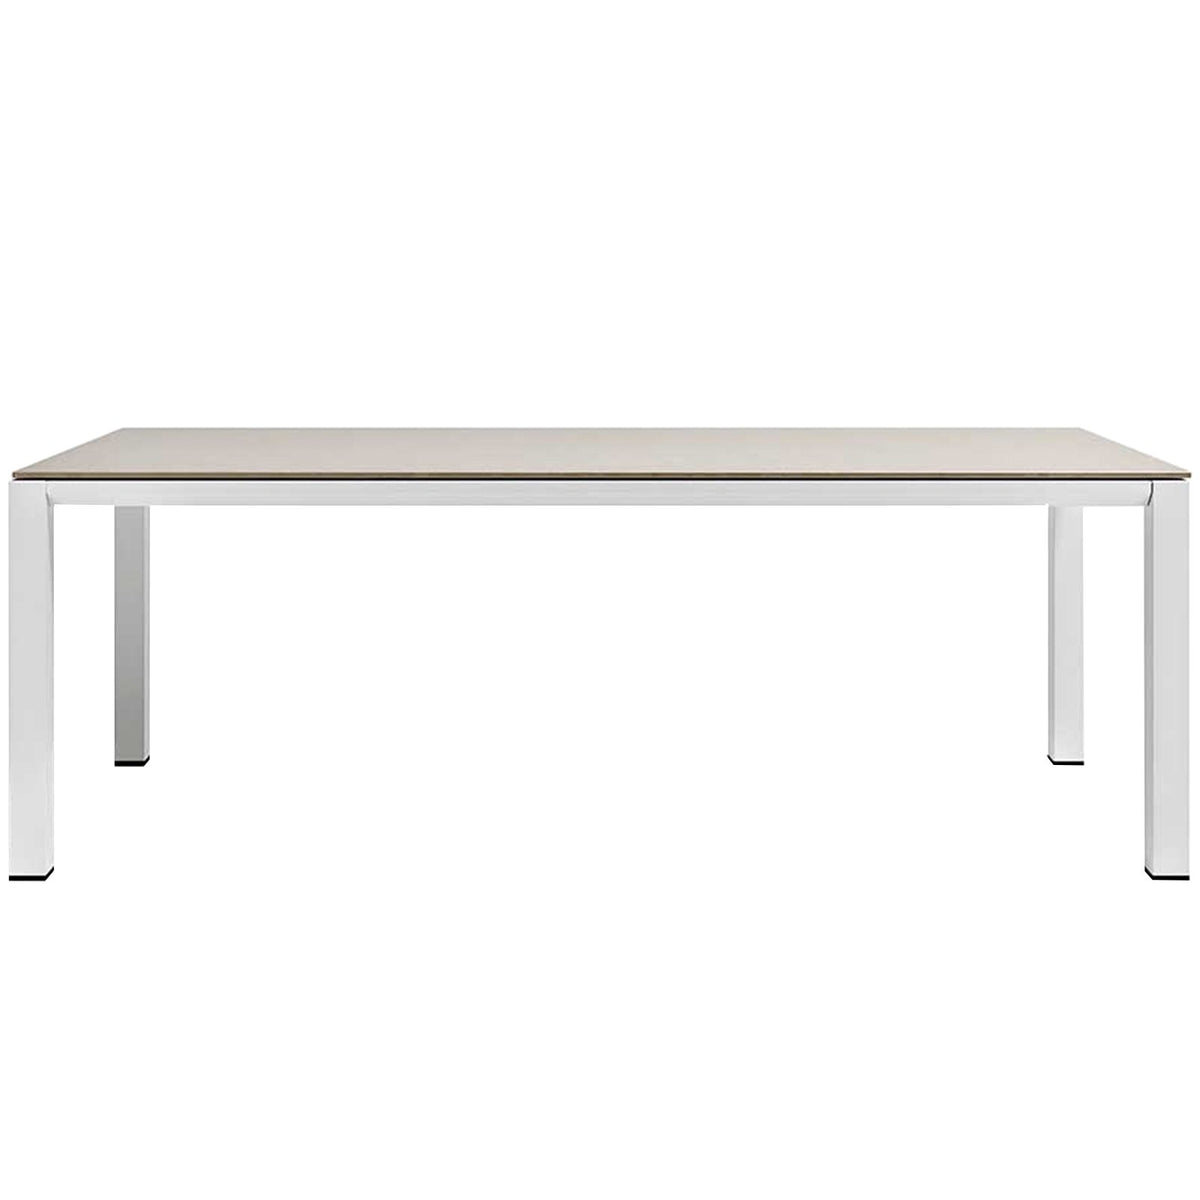 Bridge Outdoor Extendable Dining Table